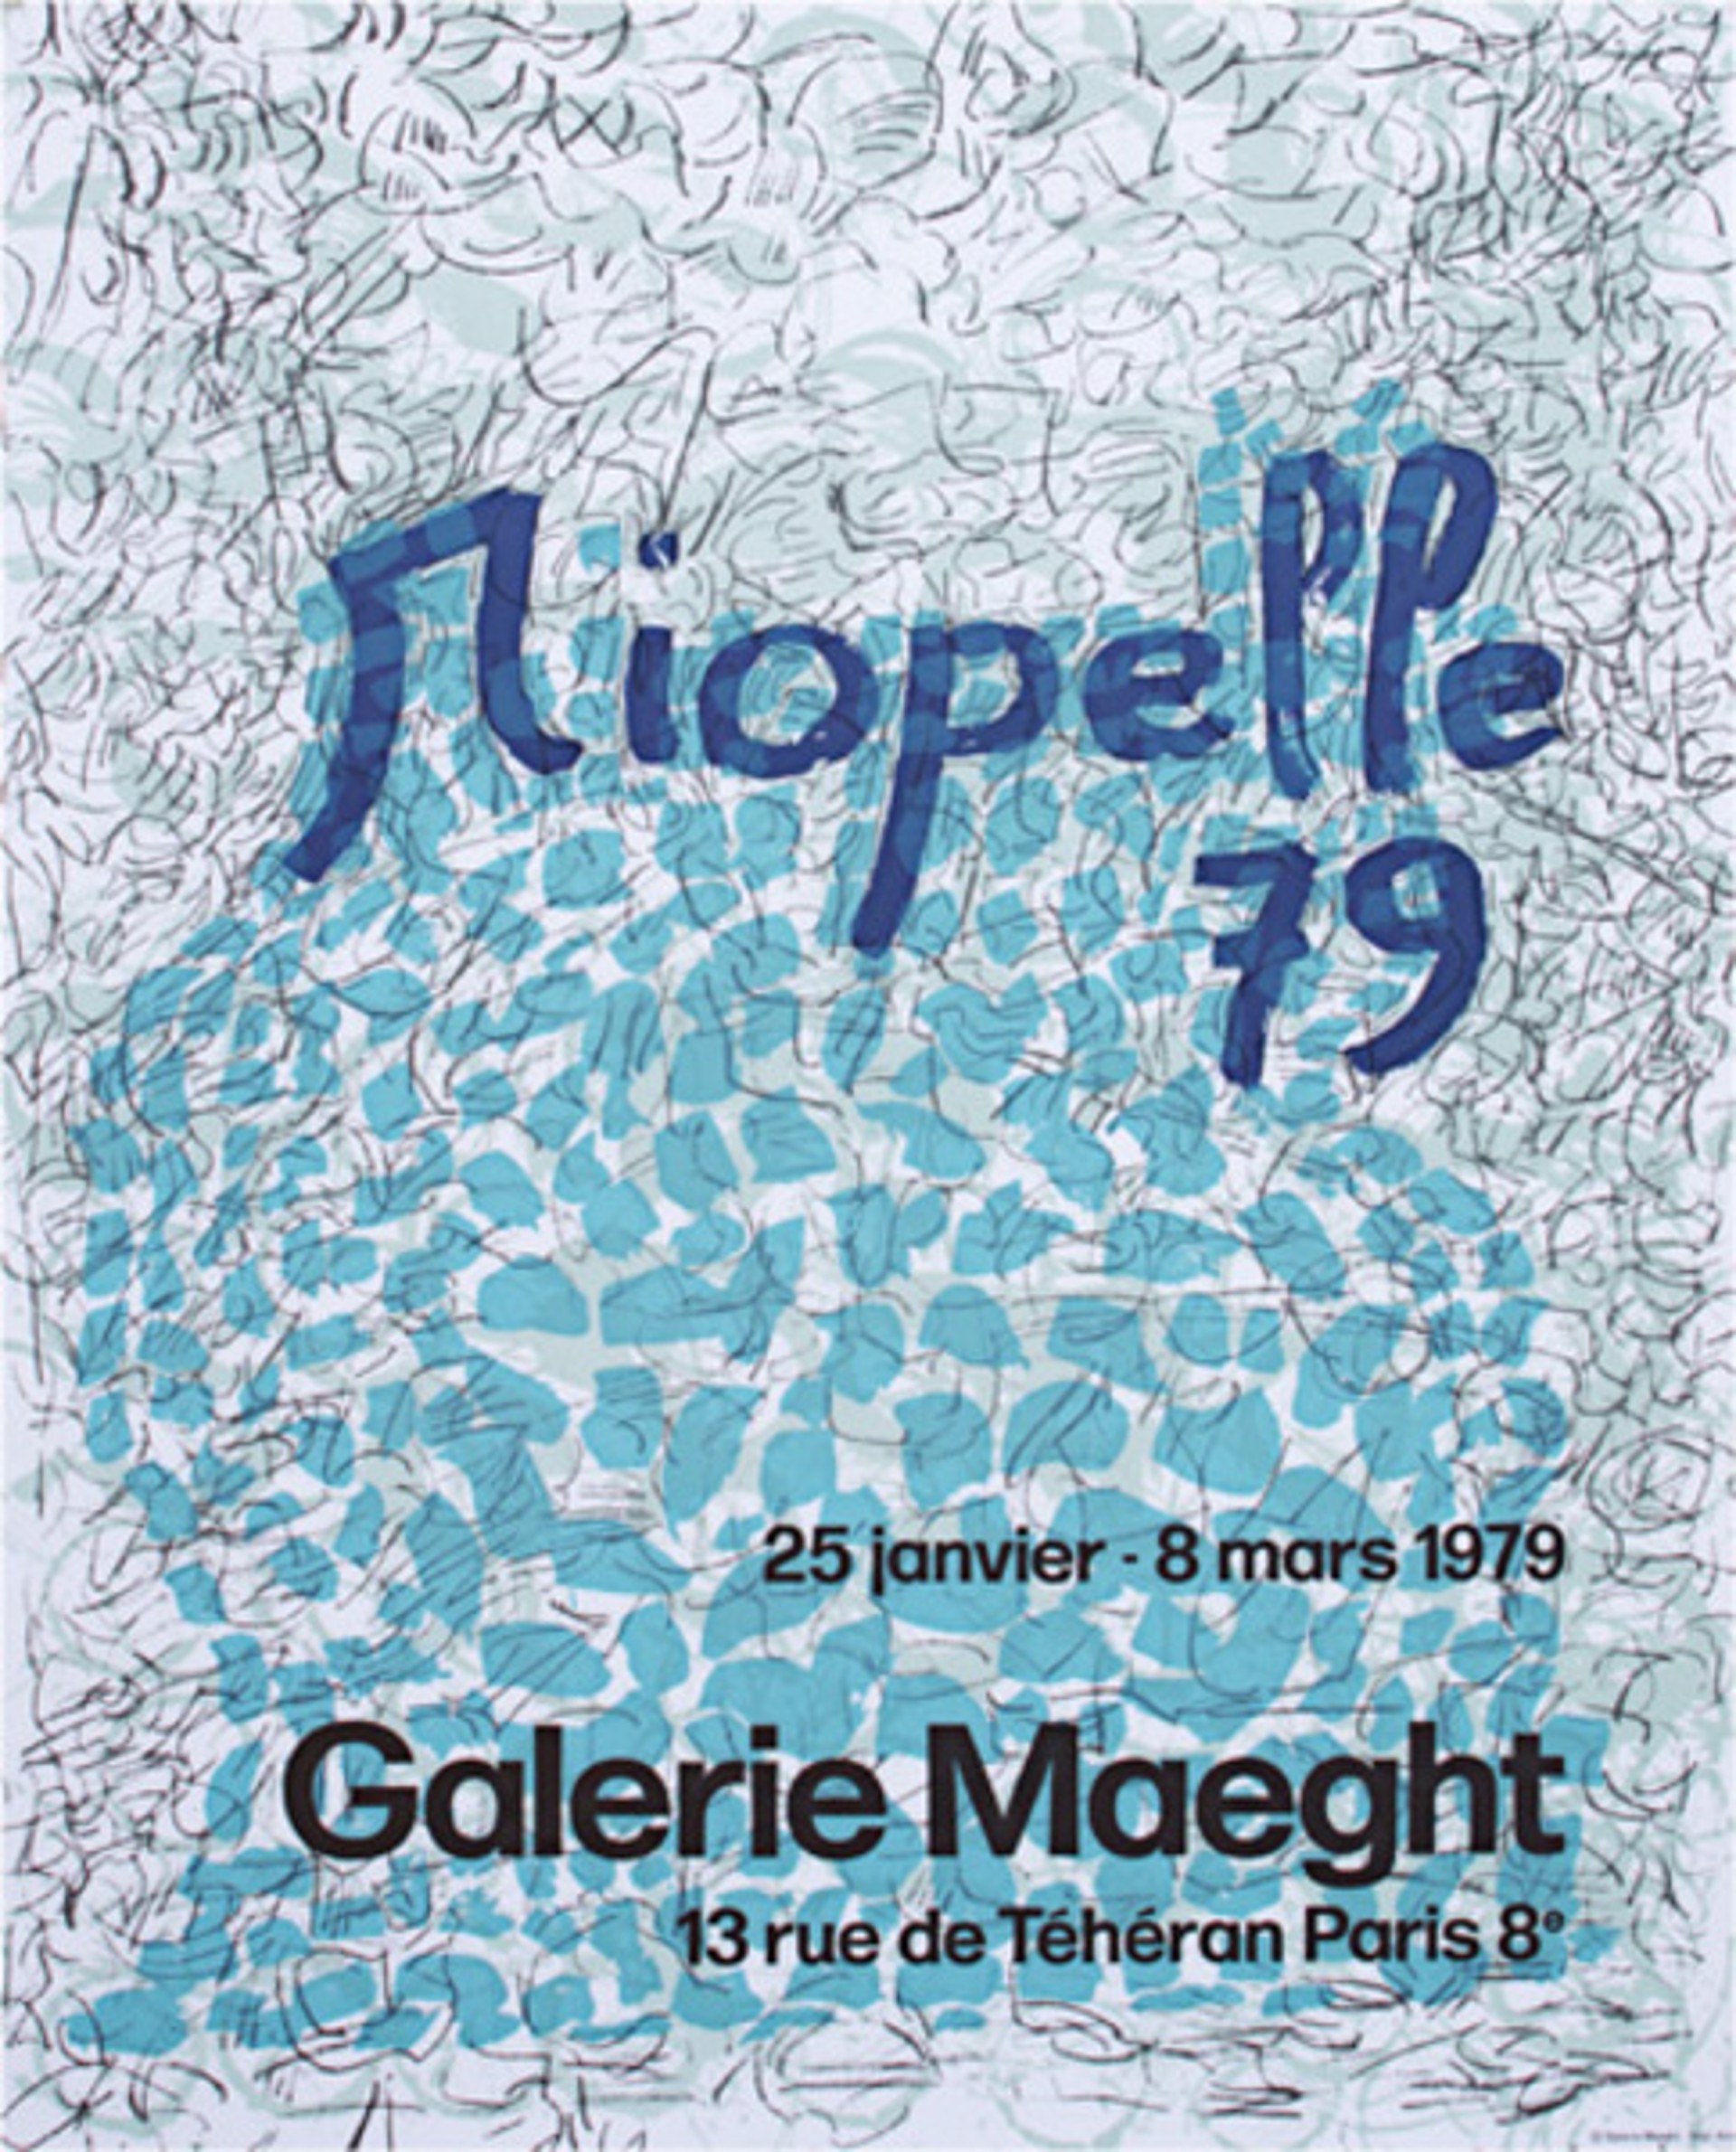 Galerie Maeght Exhibition by Jean-Paul Riopelle